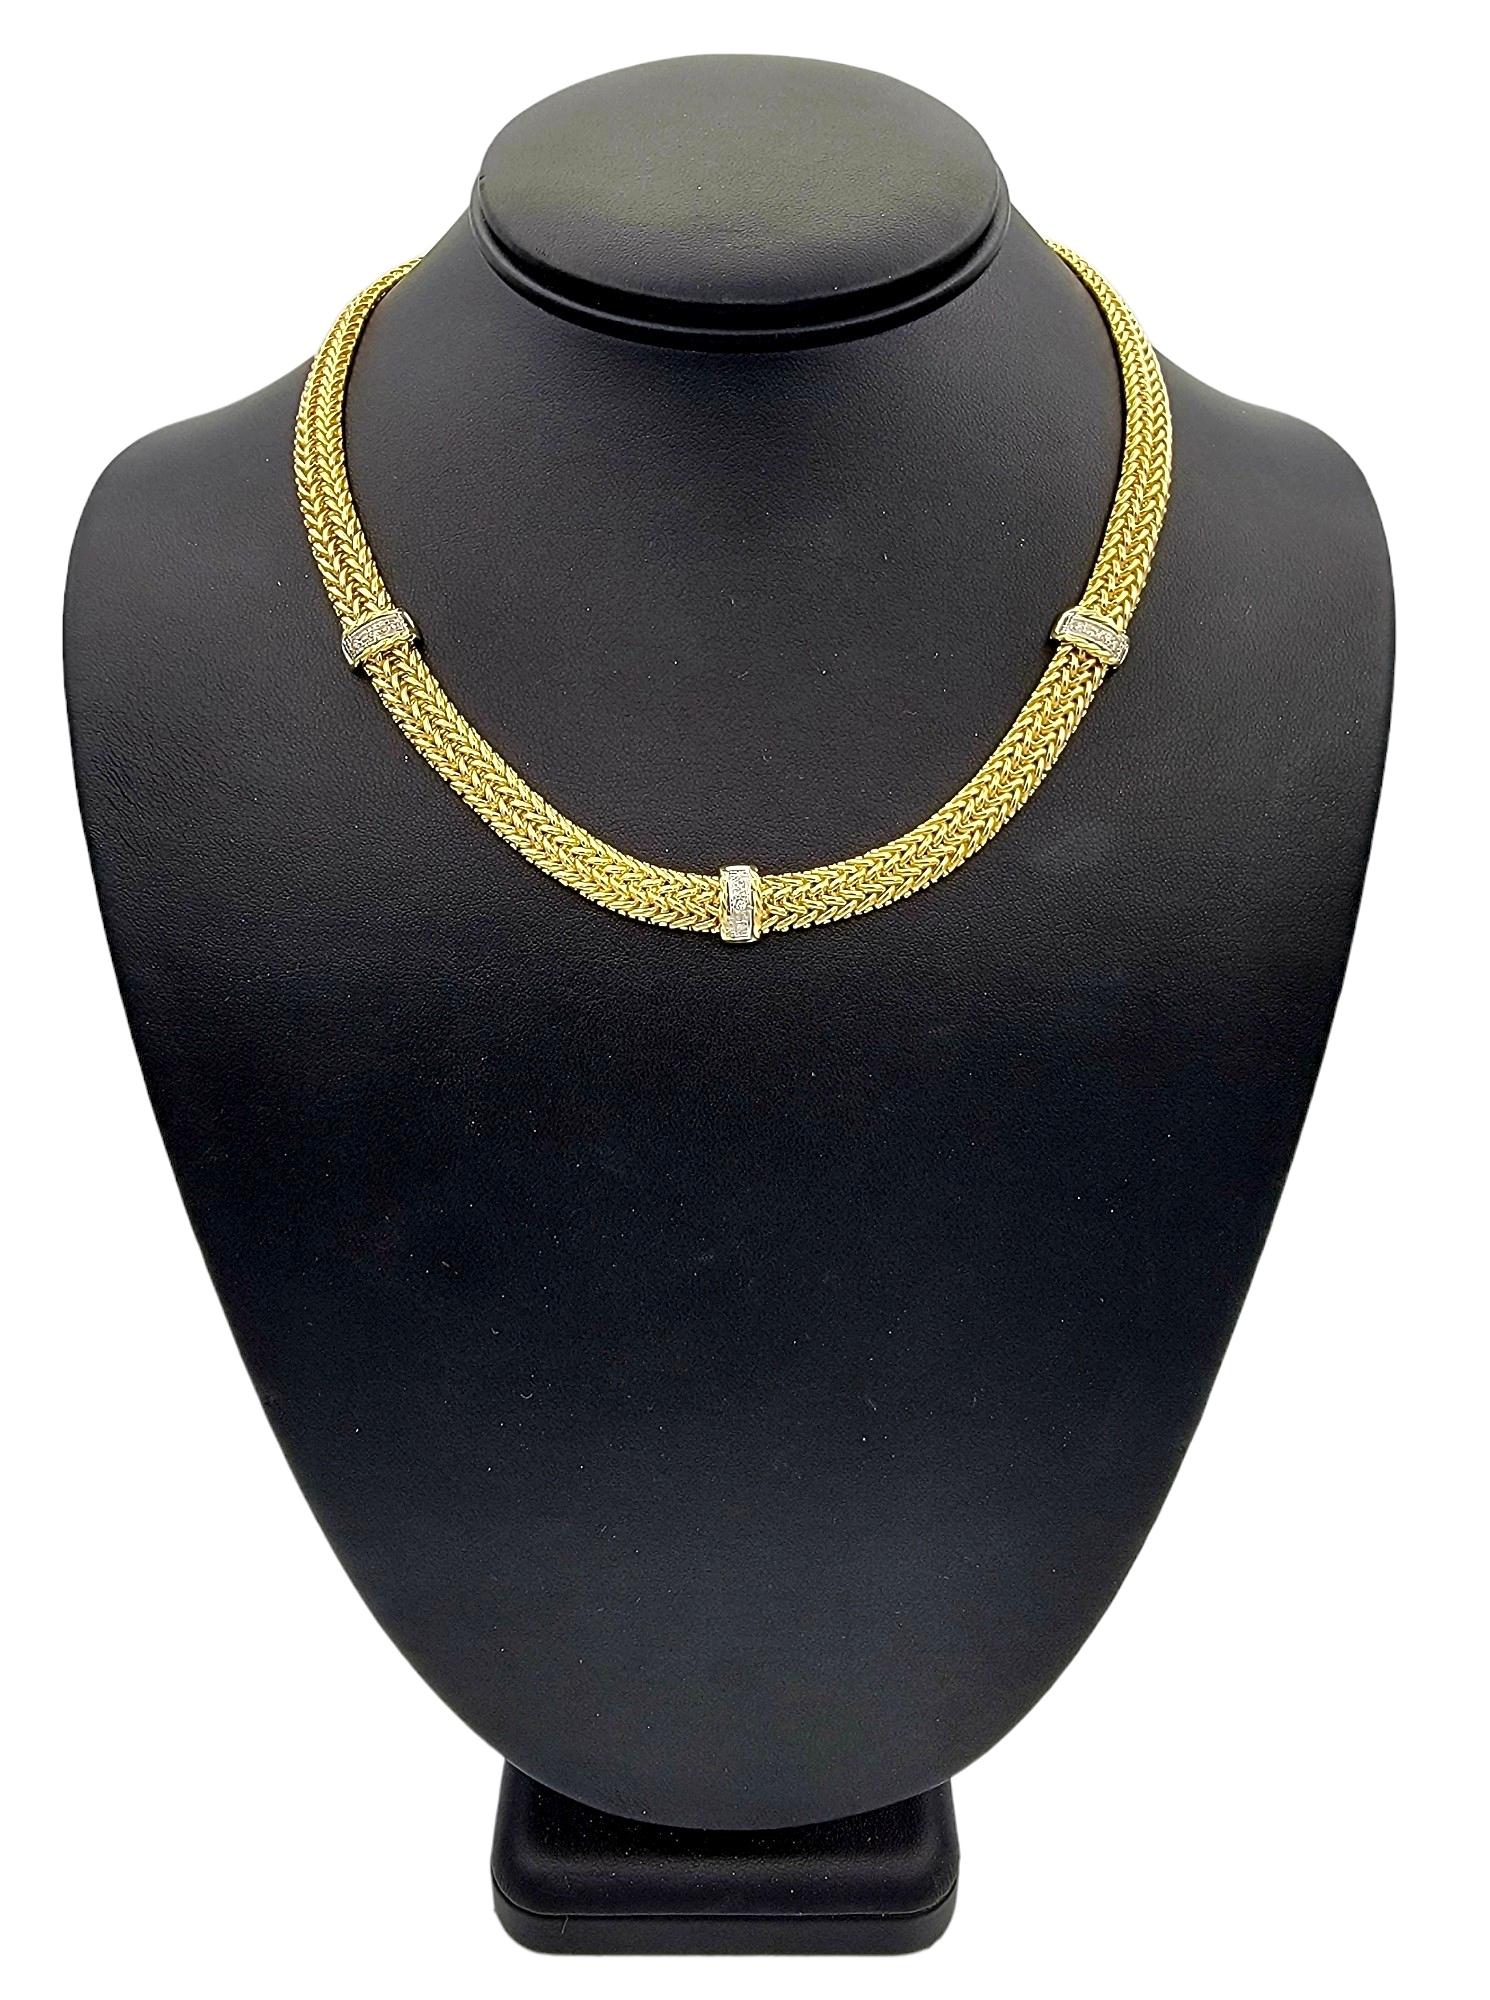 Women's 14 Karat Yellow Gold Woven Mesh Link Collar Necklace with 3 Diamond Stations  